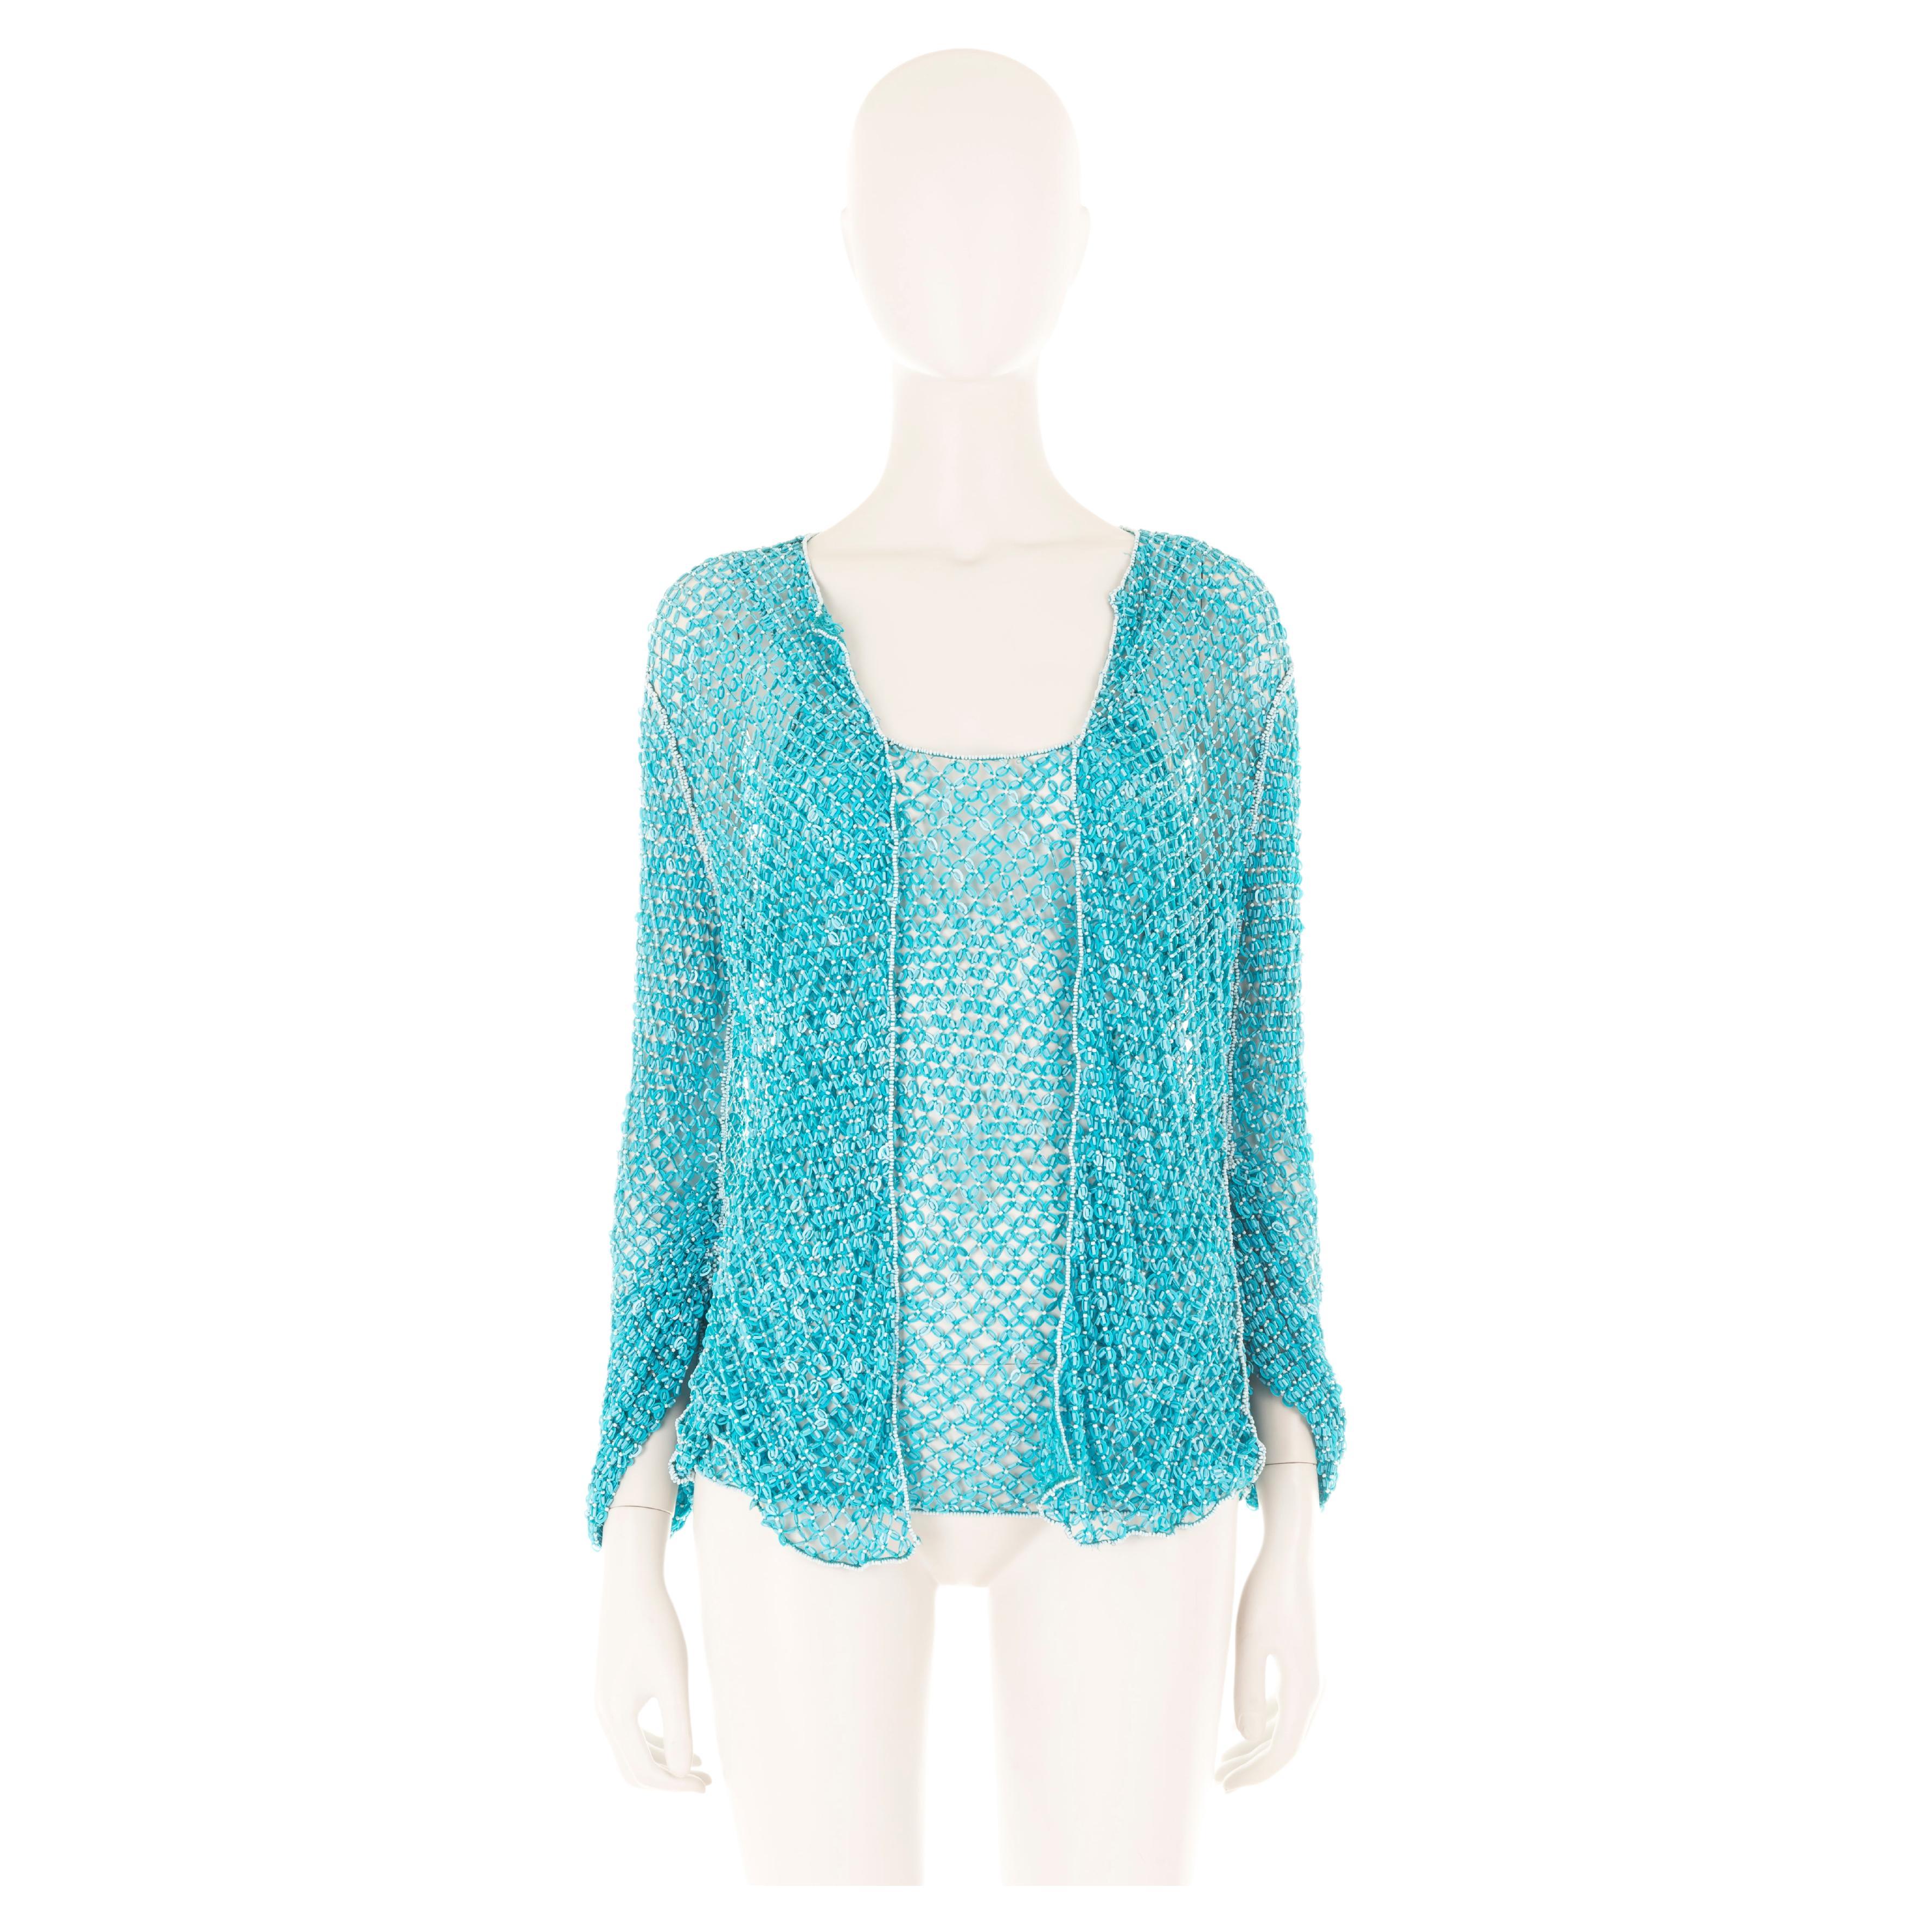 - Beaded fishnet twinset (cardigan+top)
- Blue and white beads
- Puckered sleeves
- Size label removed, fits S